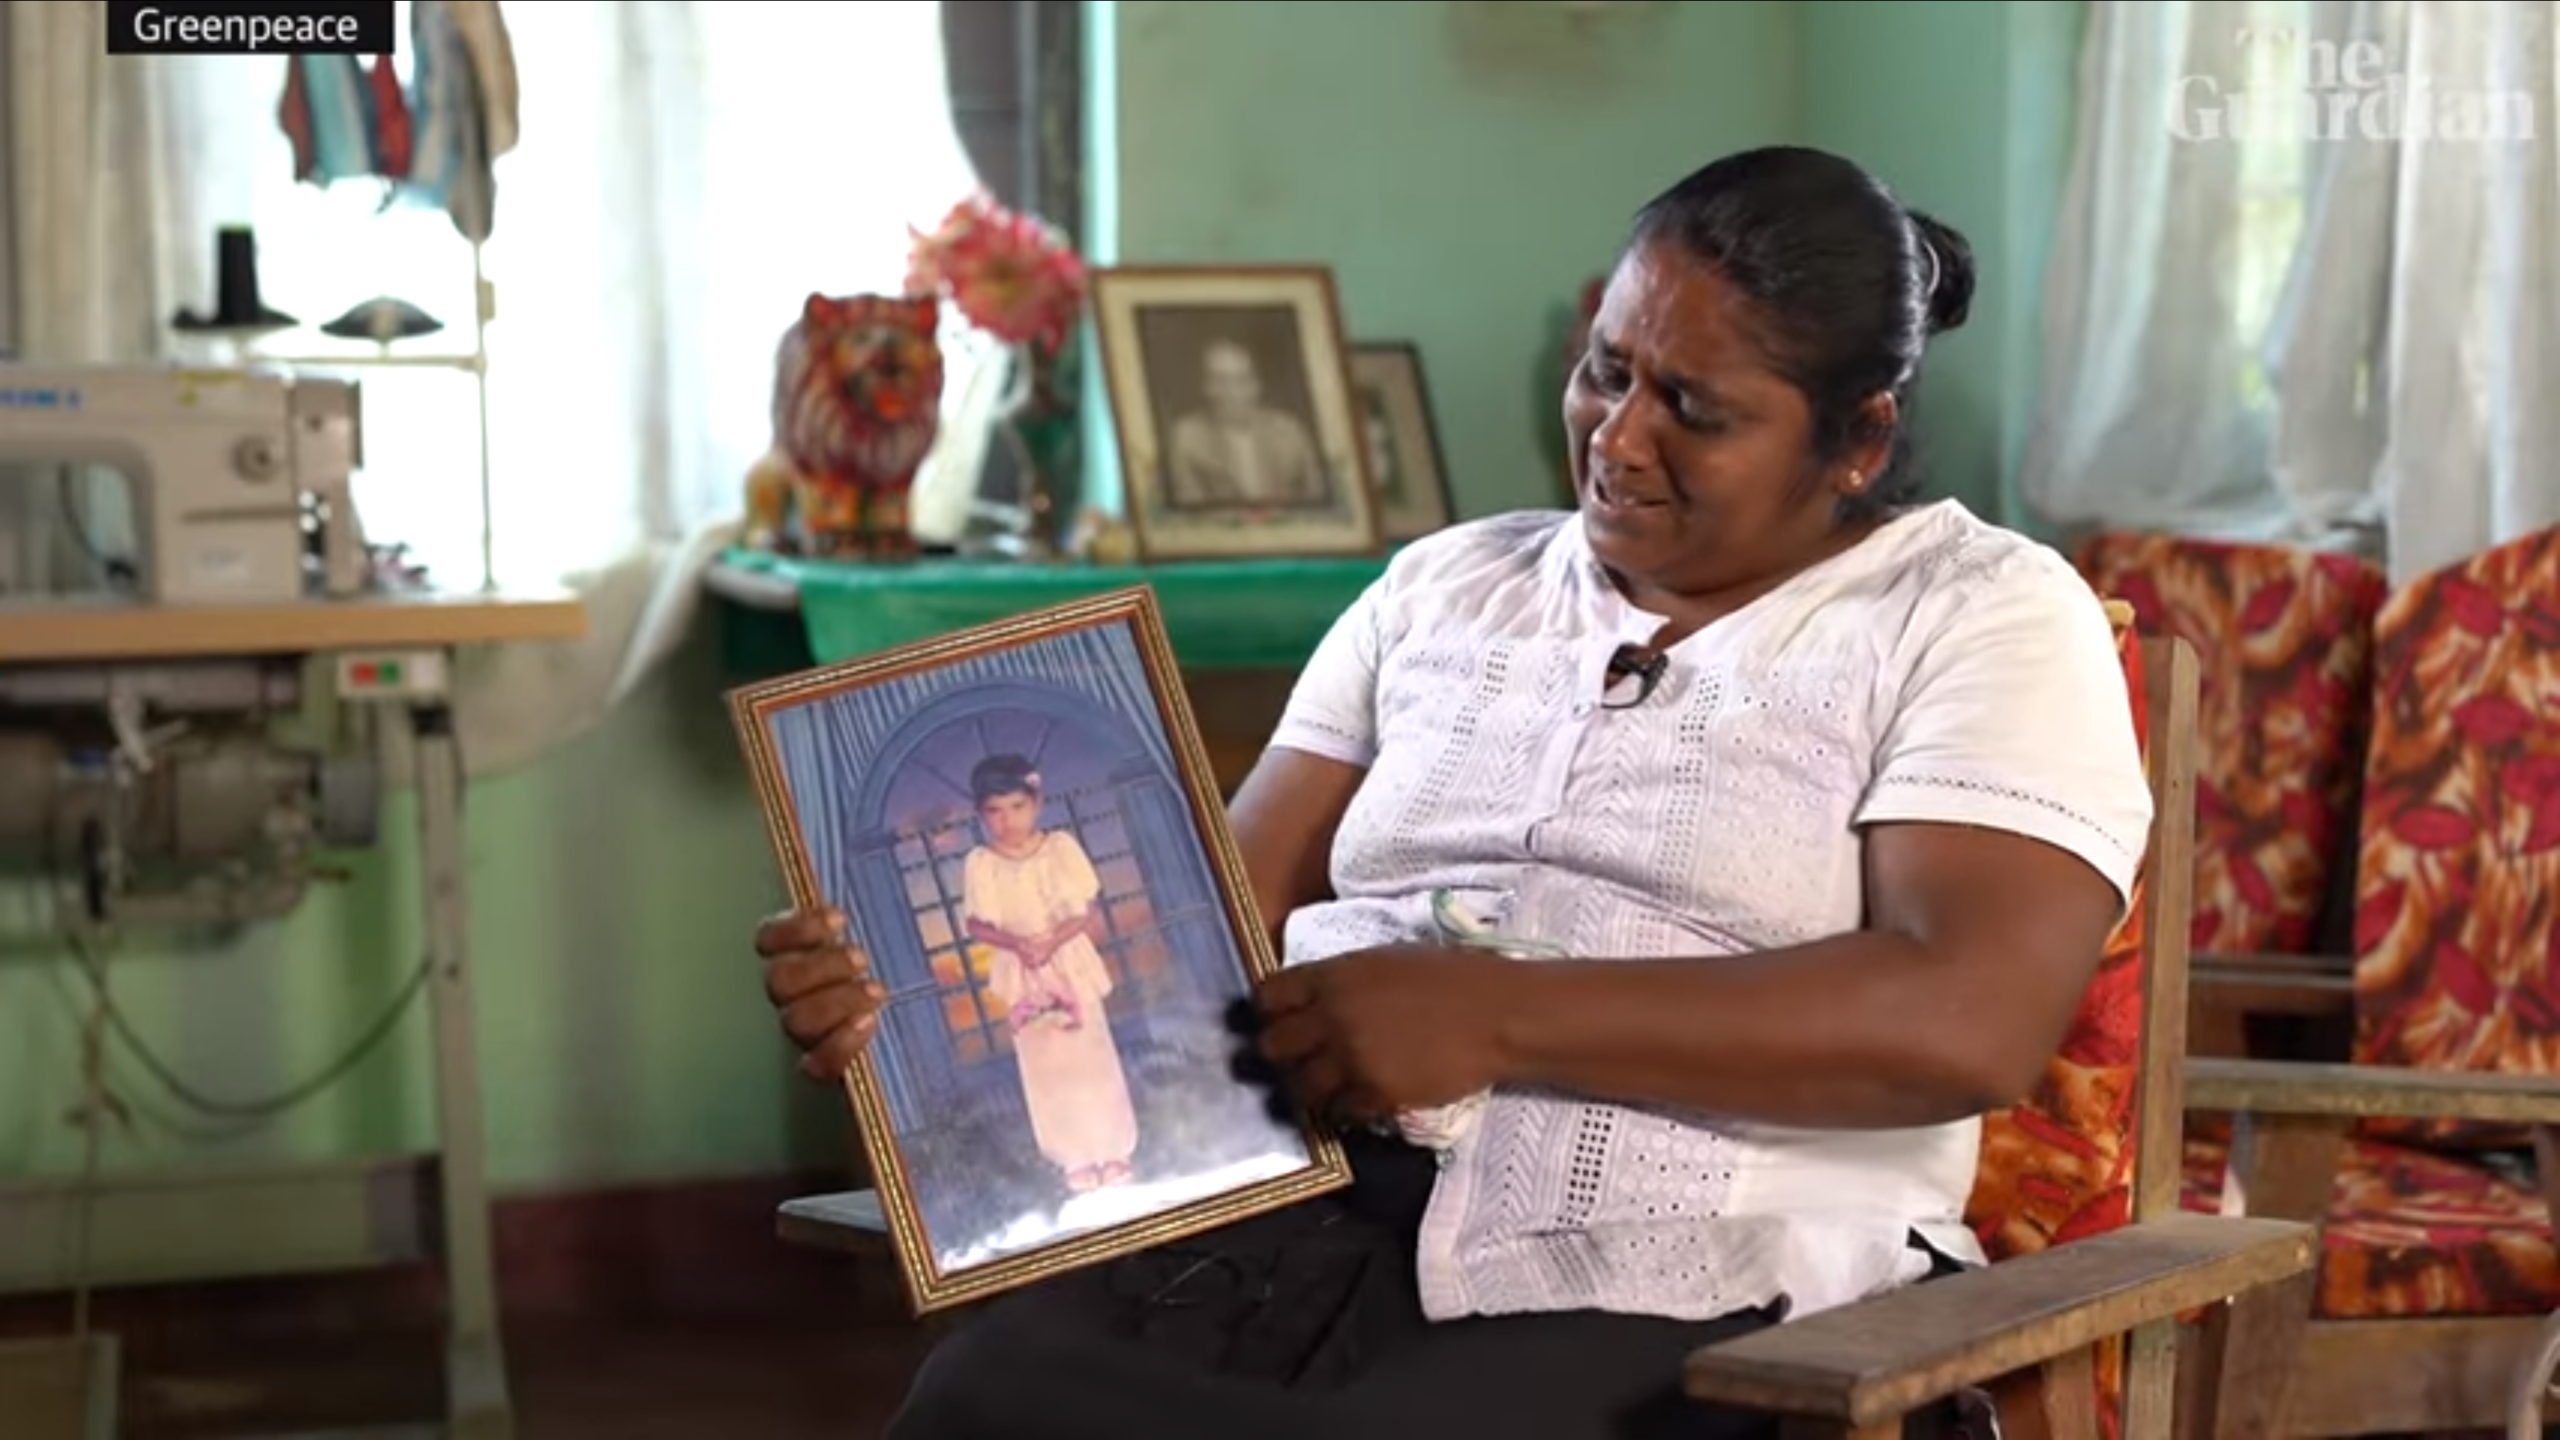 Sri Lankan mother Sumitra Dissanayake weeps for her dead daughter, Shashikala Sewwandi, who she says was killed by the herbicide paraquat. She pleads for extremely poisonous pesticides and herbicides to be banned. “I don’t want anyone to grieve like me.” Photo: Greenpeace / The Guardian